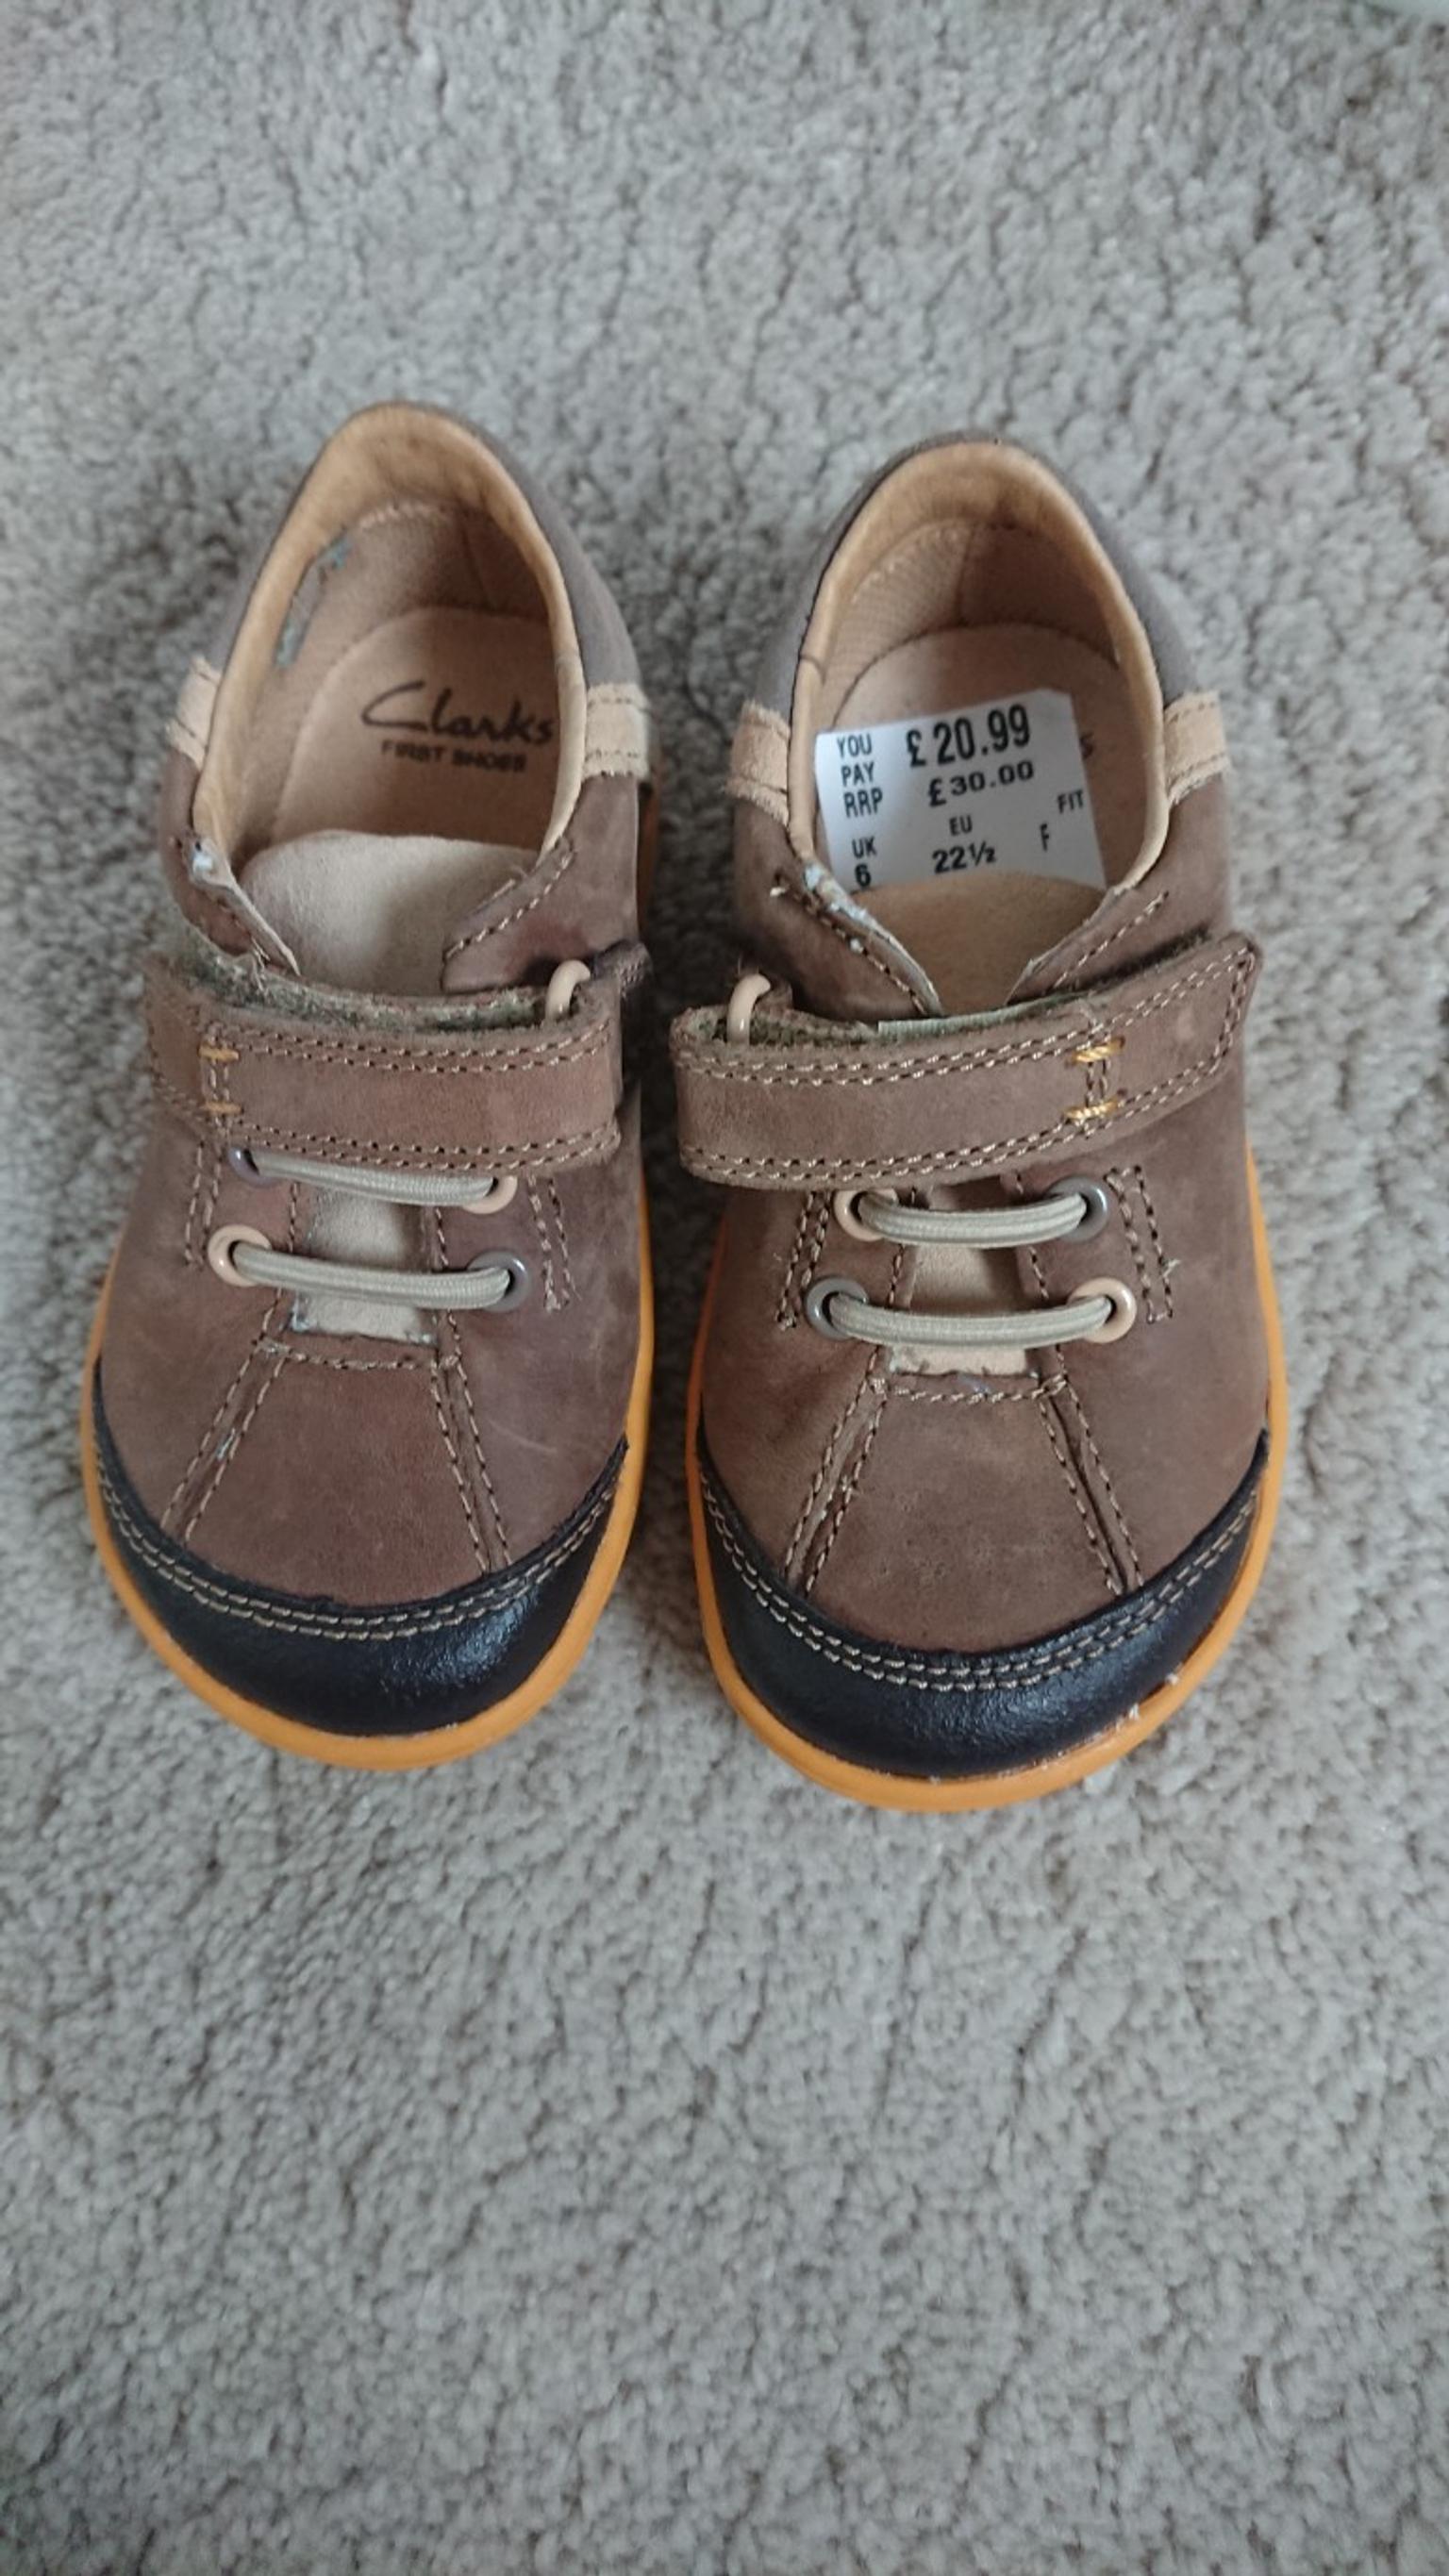 Clarks shoes toddler size 6 in WF4 